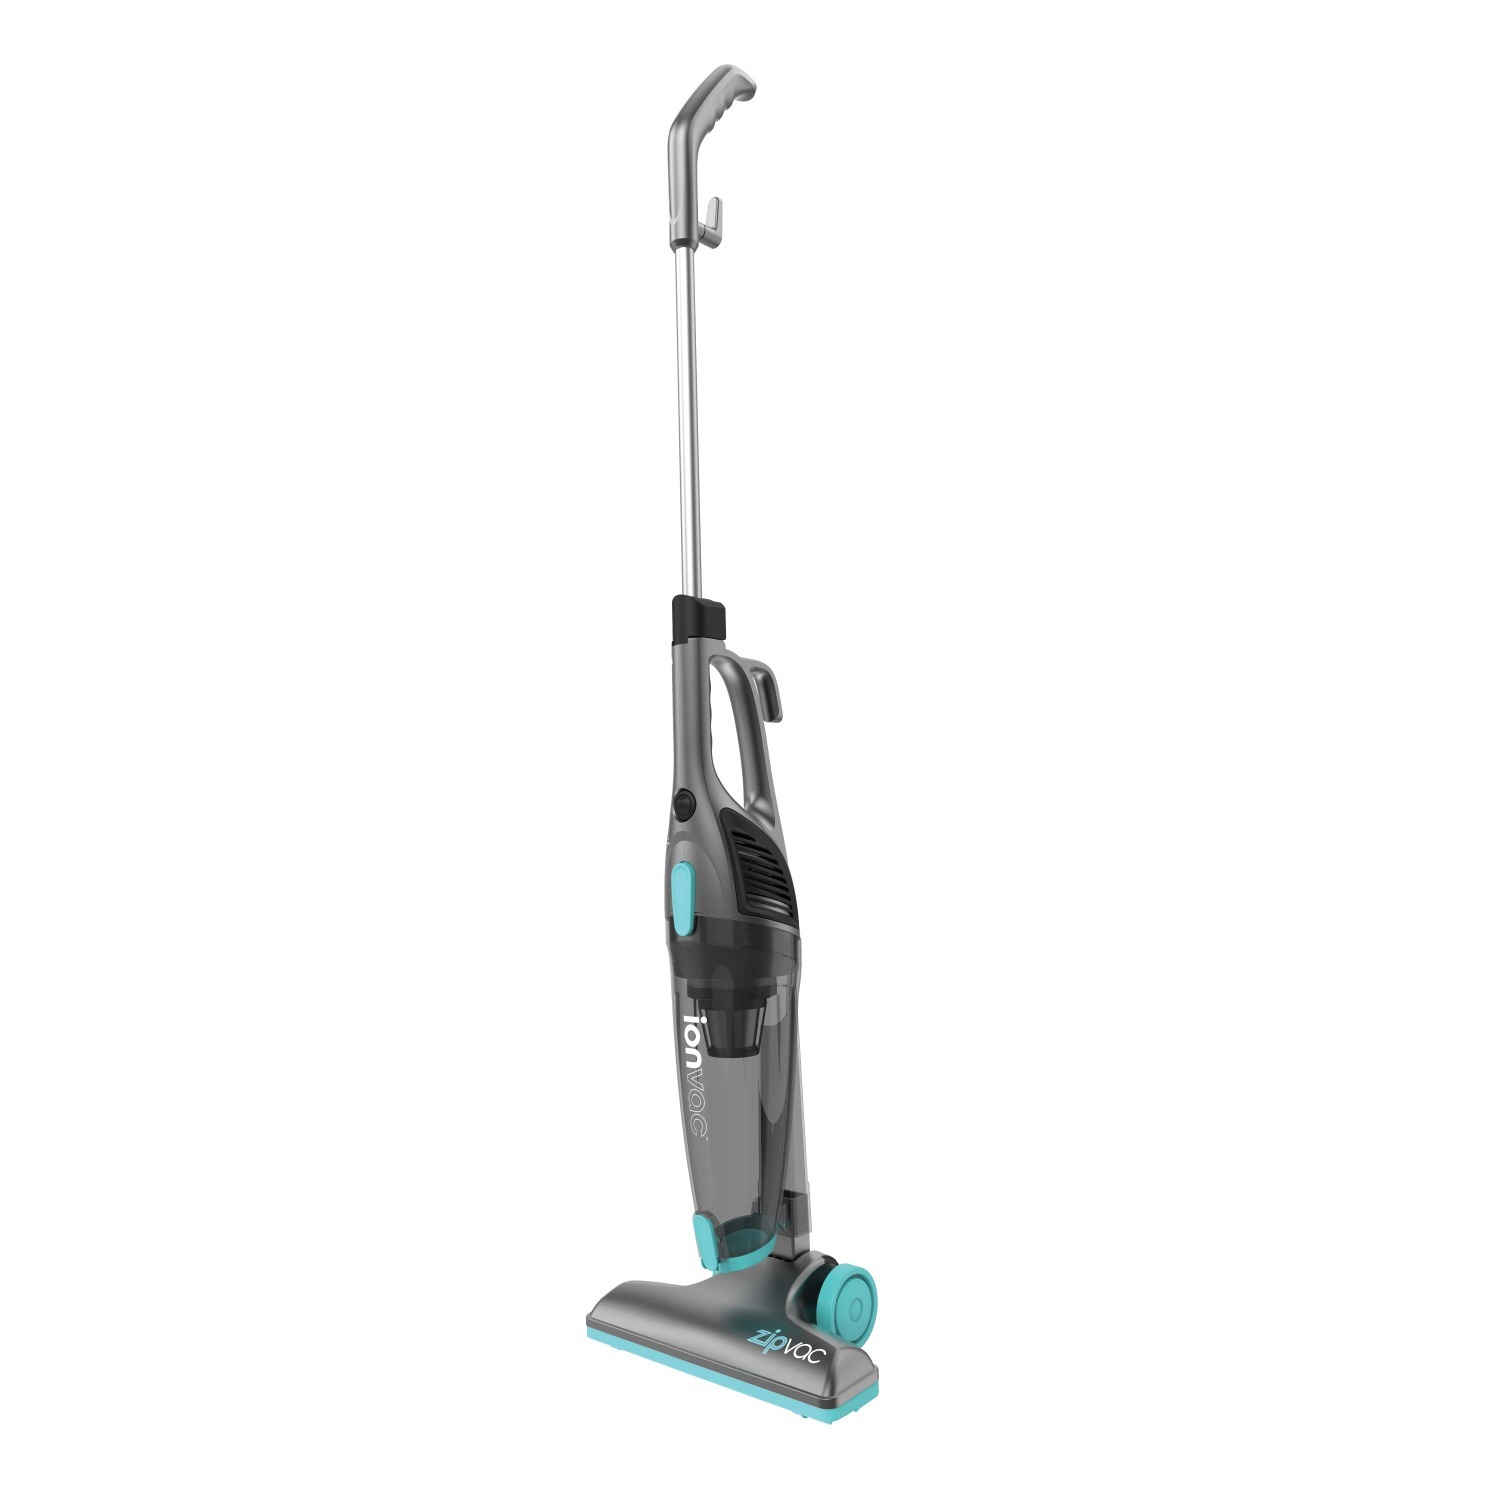 Tzumi Upright Dry Zip 2-in-1 Vacuum $20 + Free Shipping on $49+